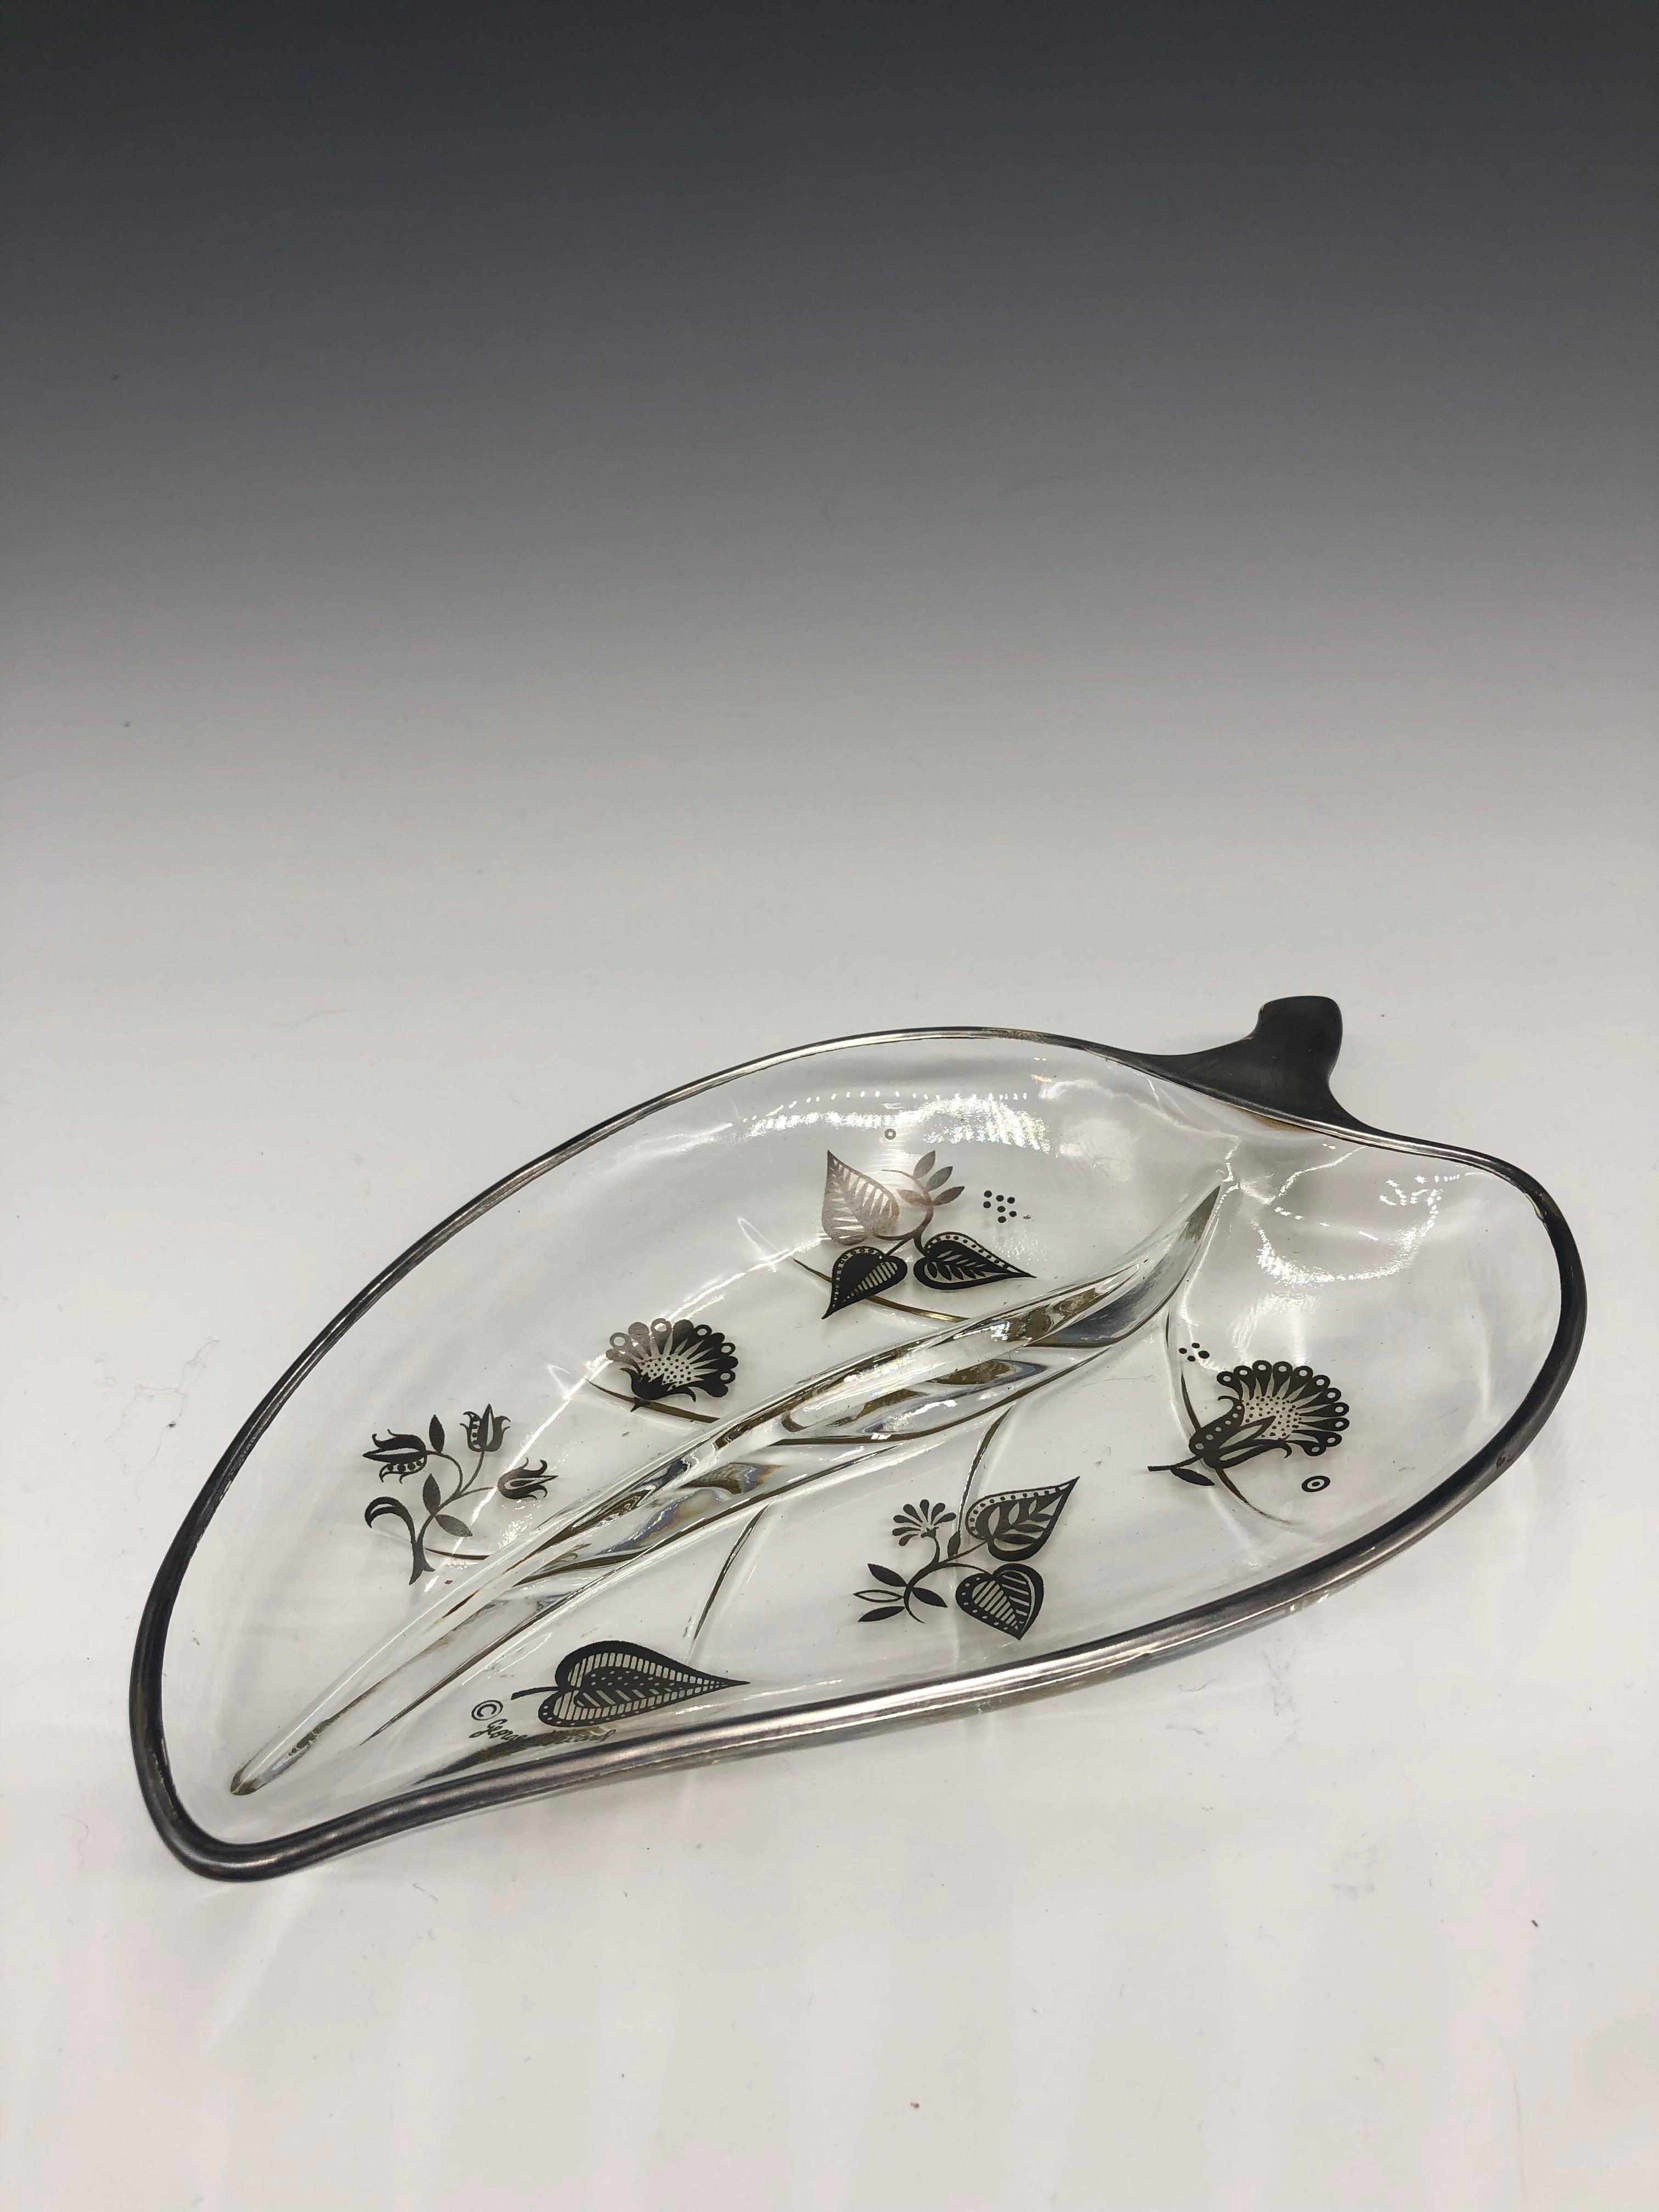 Vintage Georges Briard Clear Leaf Tray Dish With Silver Floral Detail 1